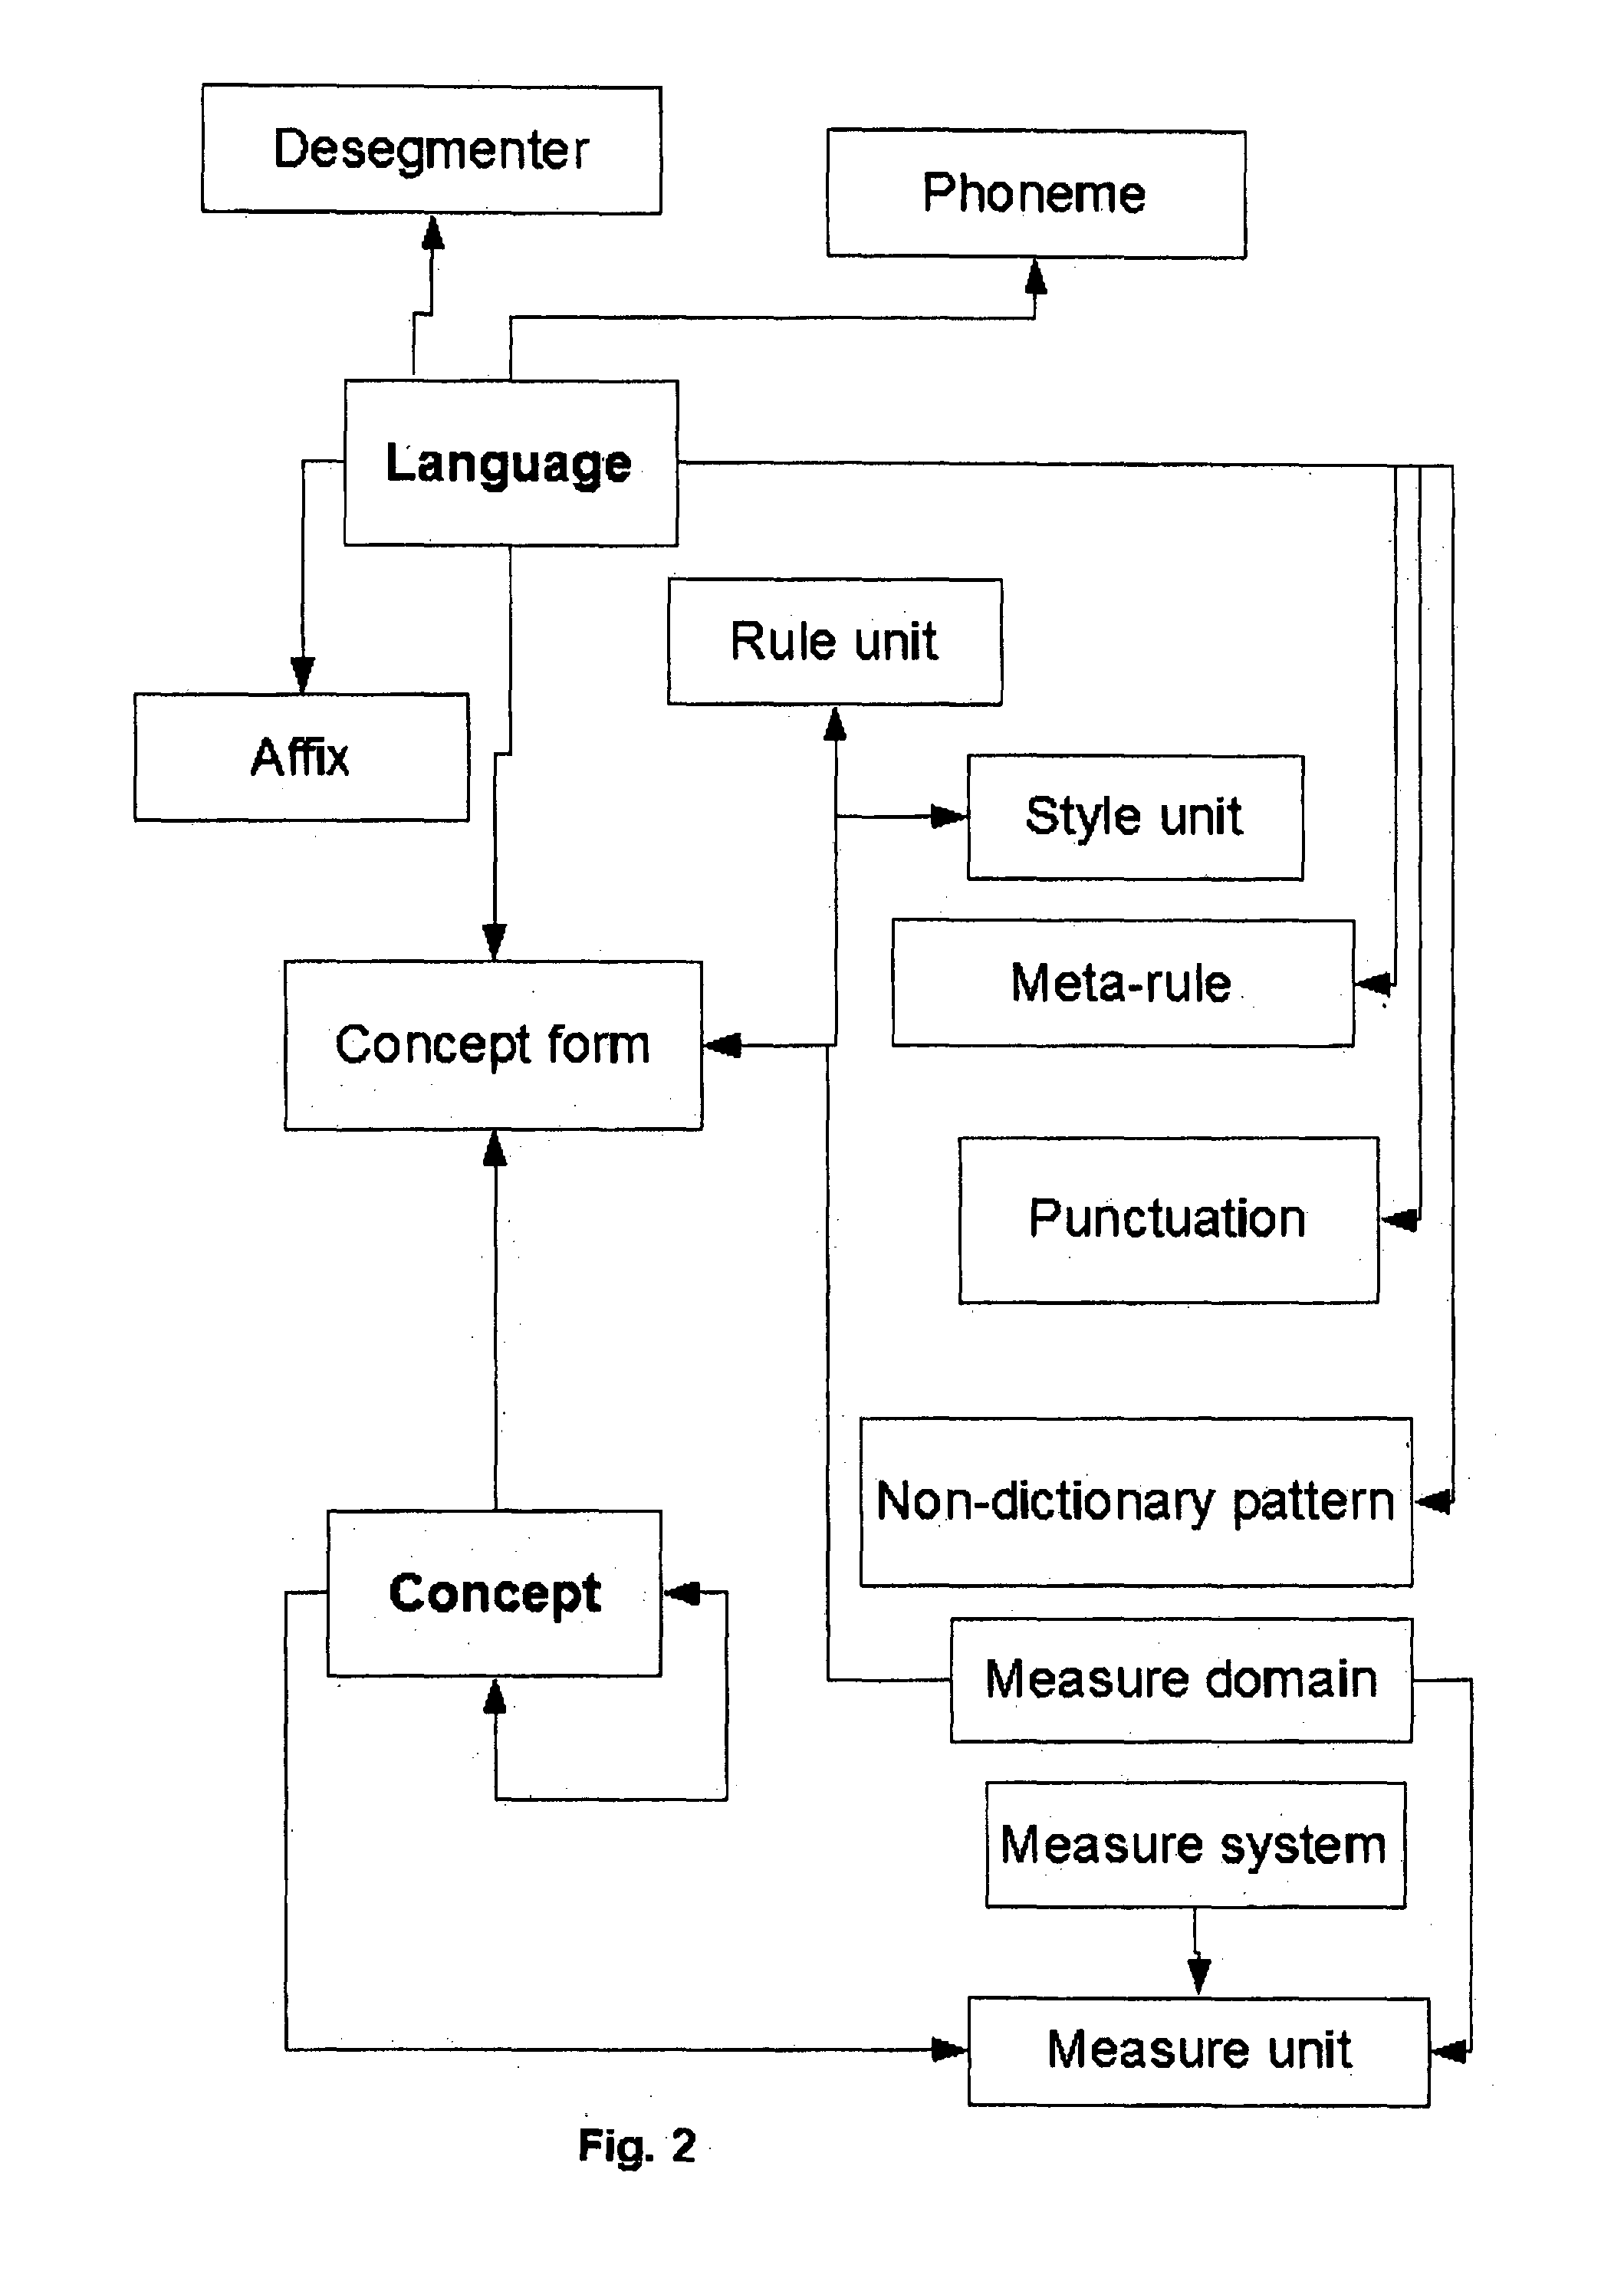 Generic system for linguistic analysis and transformation